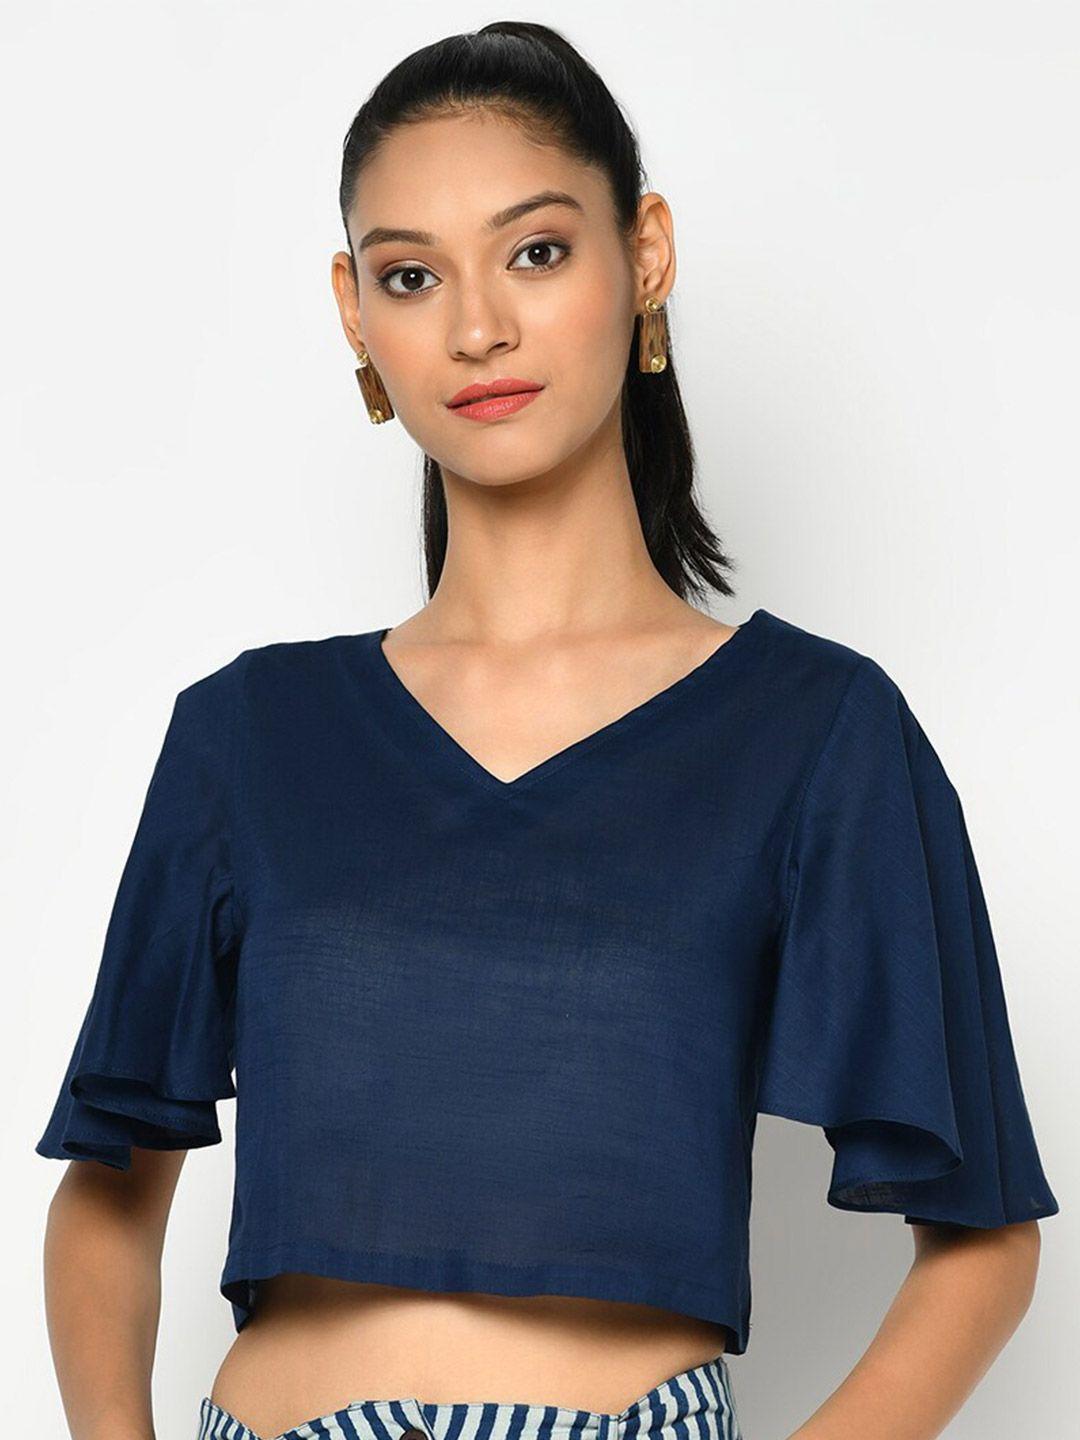 Fabindia Blue Solid Pure Cotton Crop Top